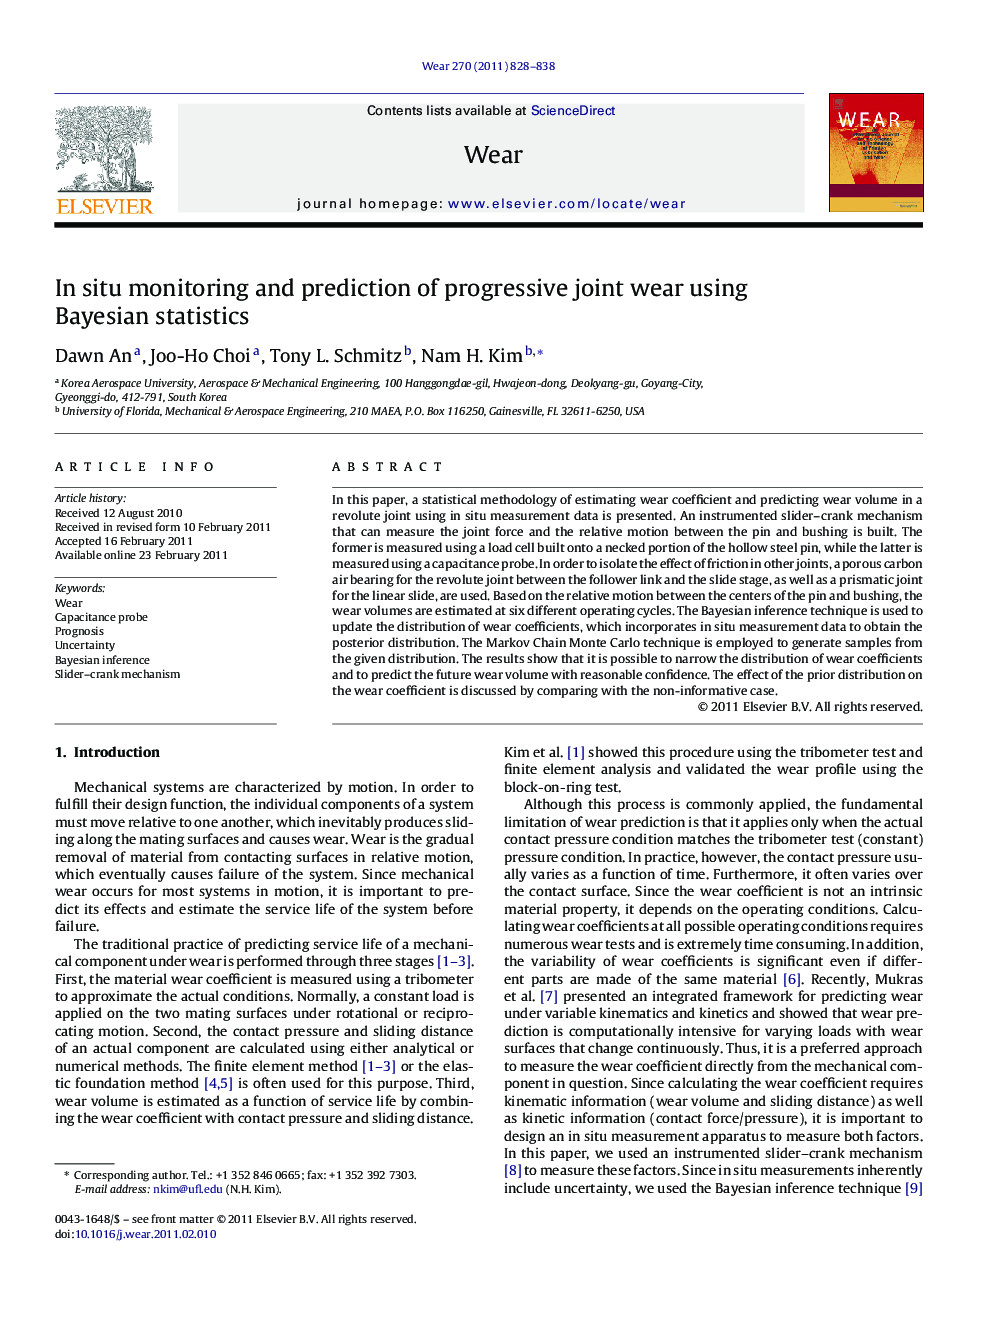 In situ monitoring and prediction of progressive joint wear using Bayesian statistics